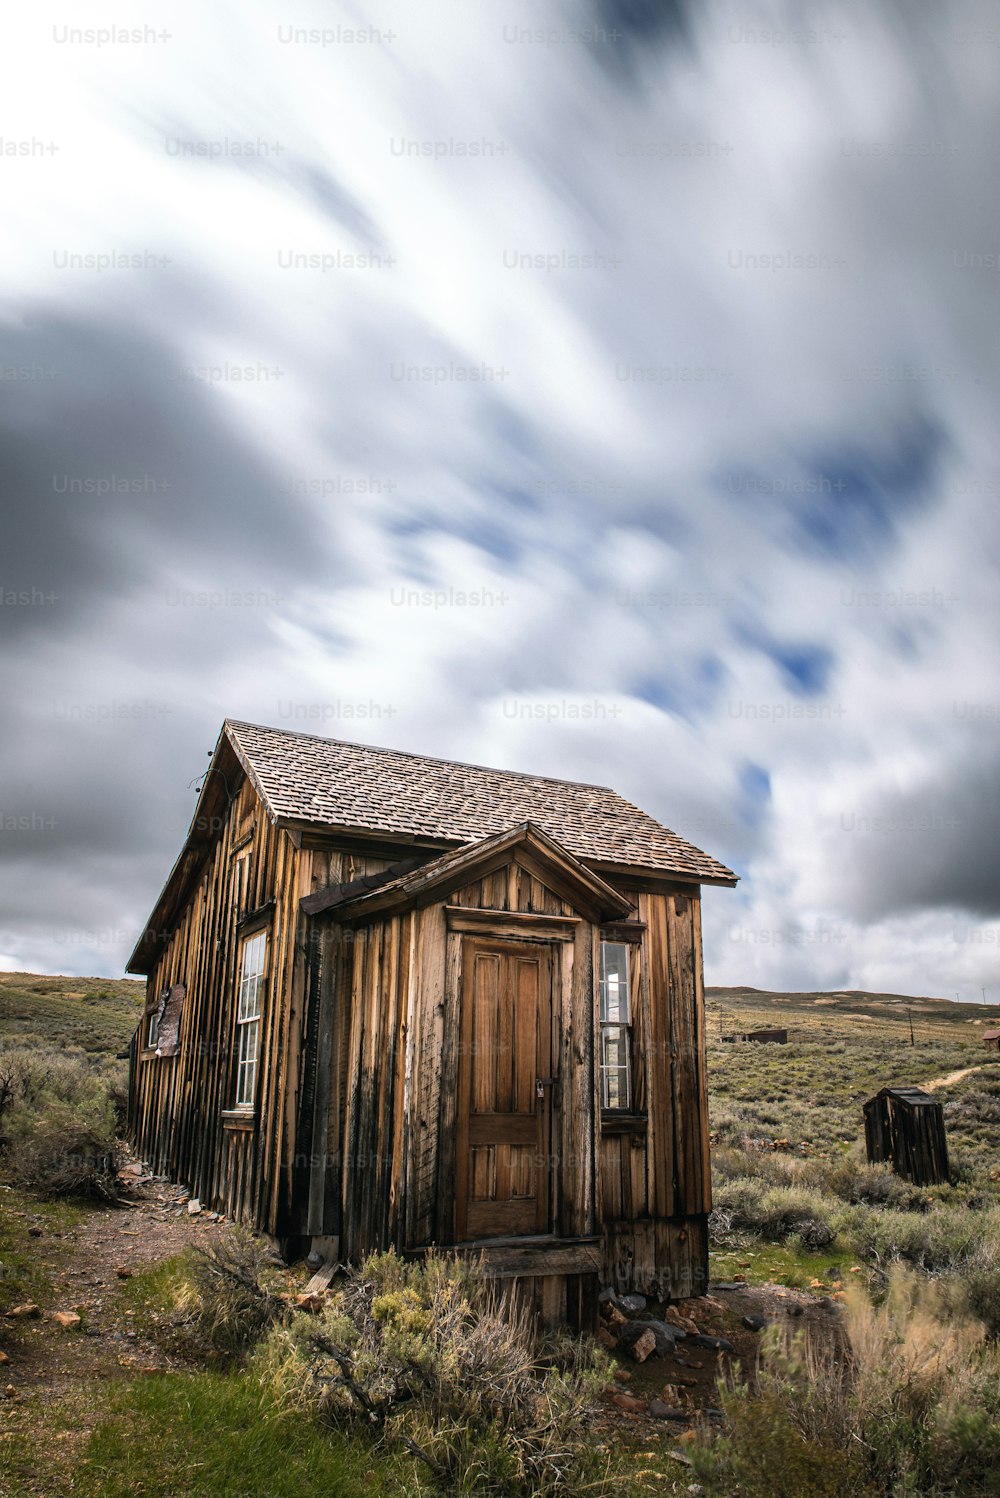 an old outhouse in the middle of nowhere